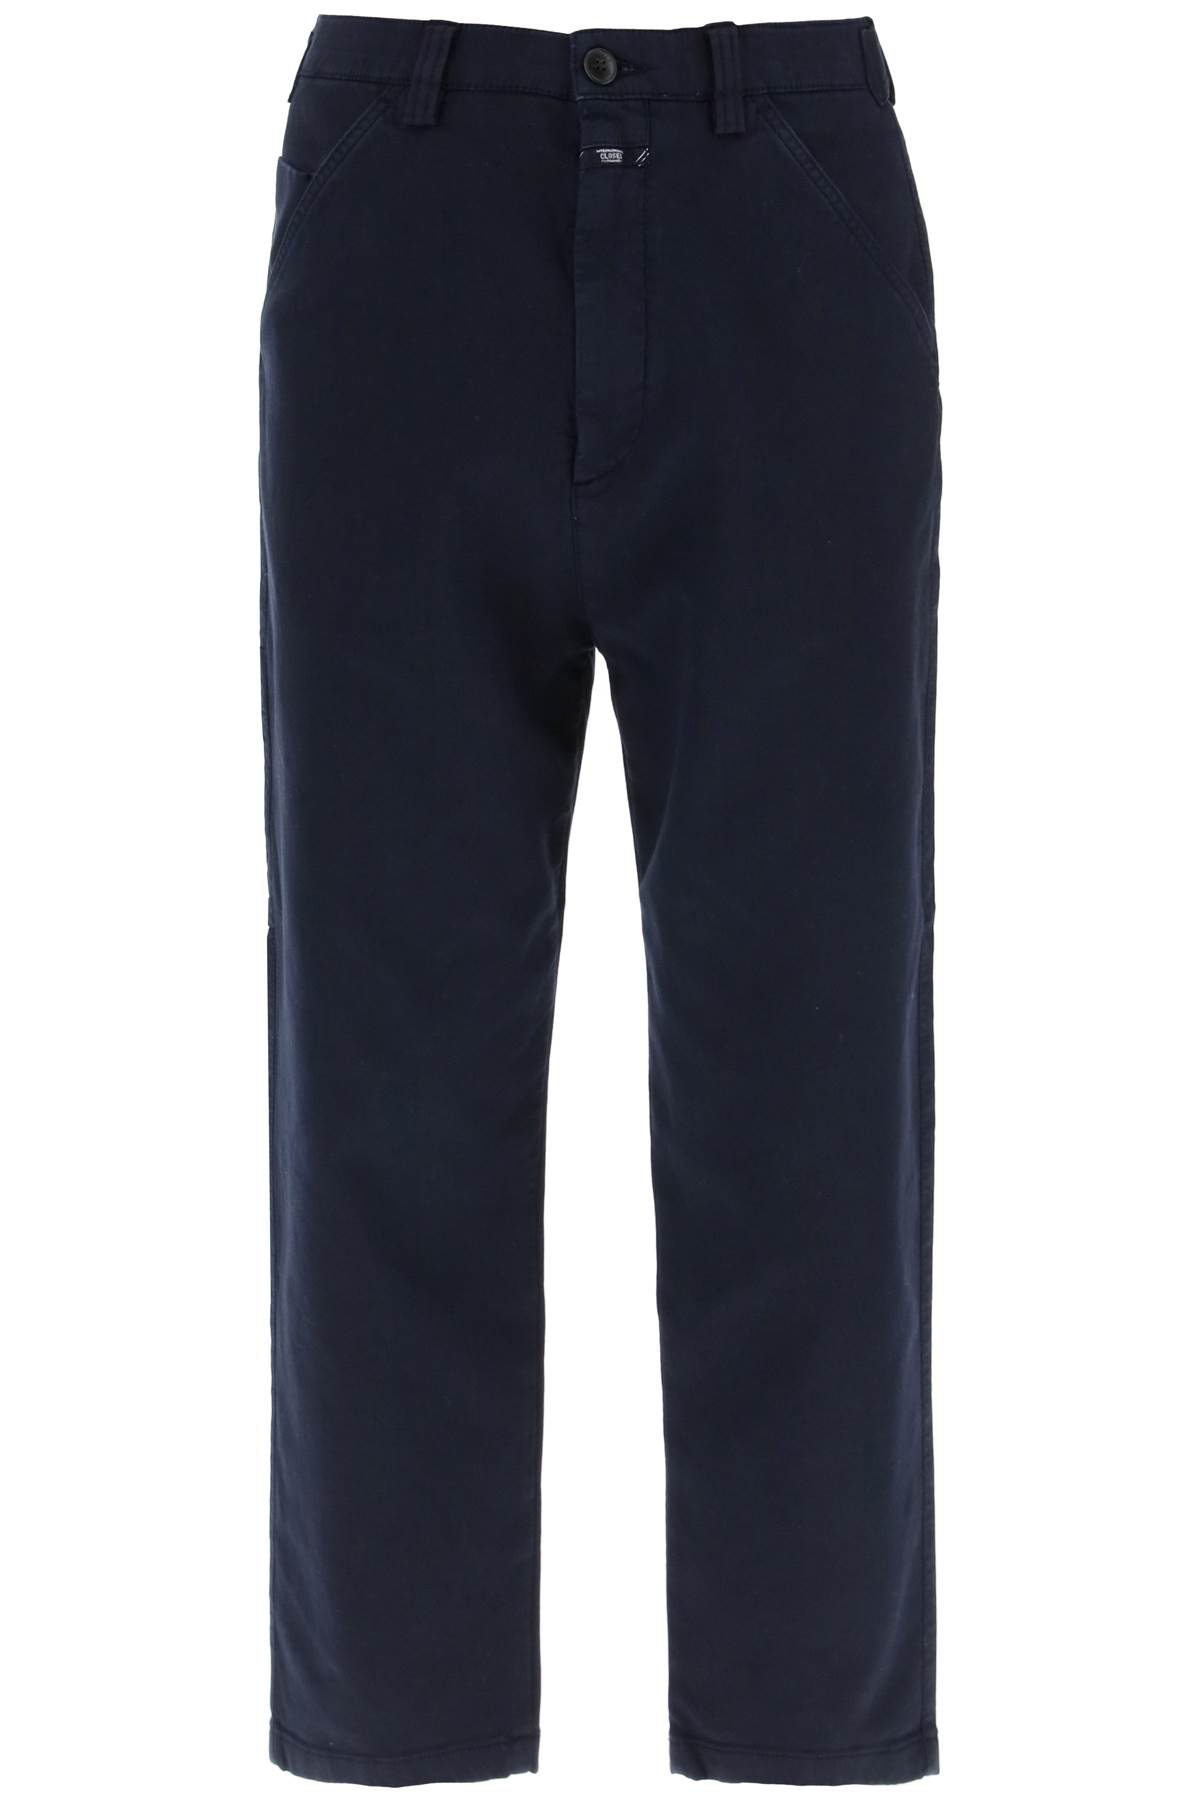 CLOSED DOVER TROUSERS